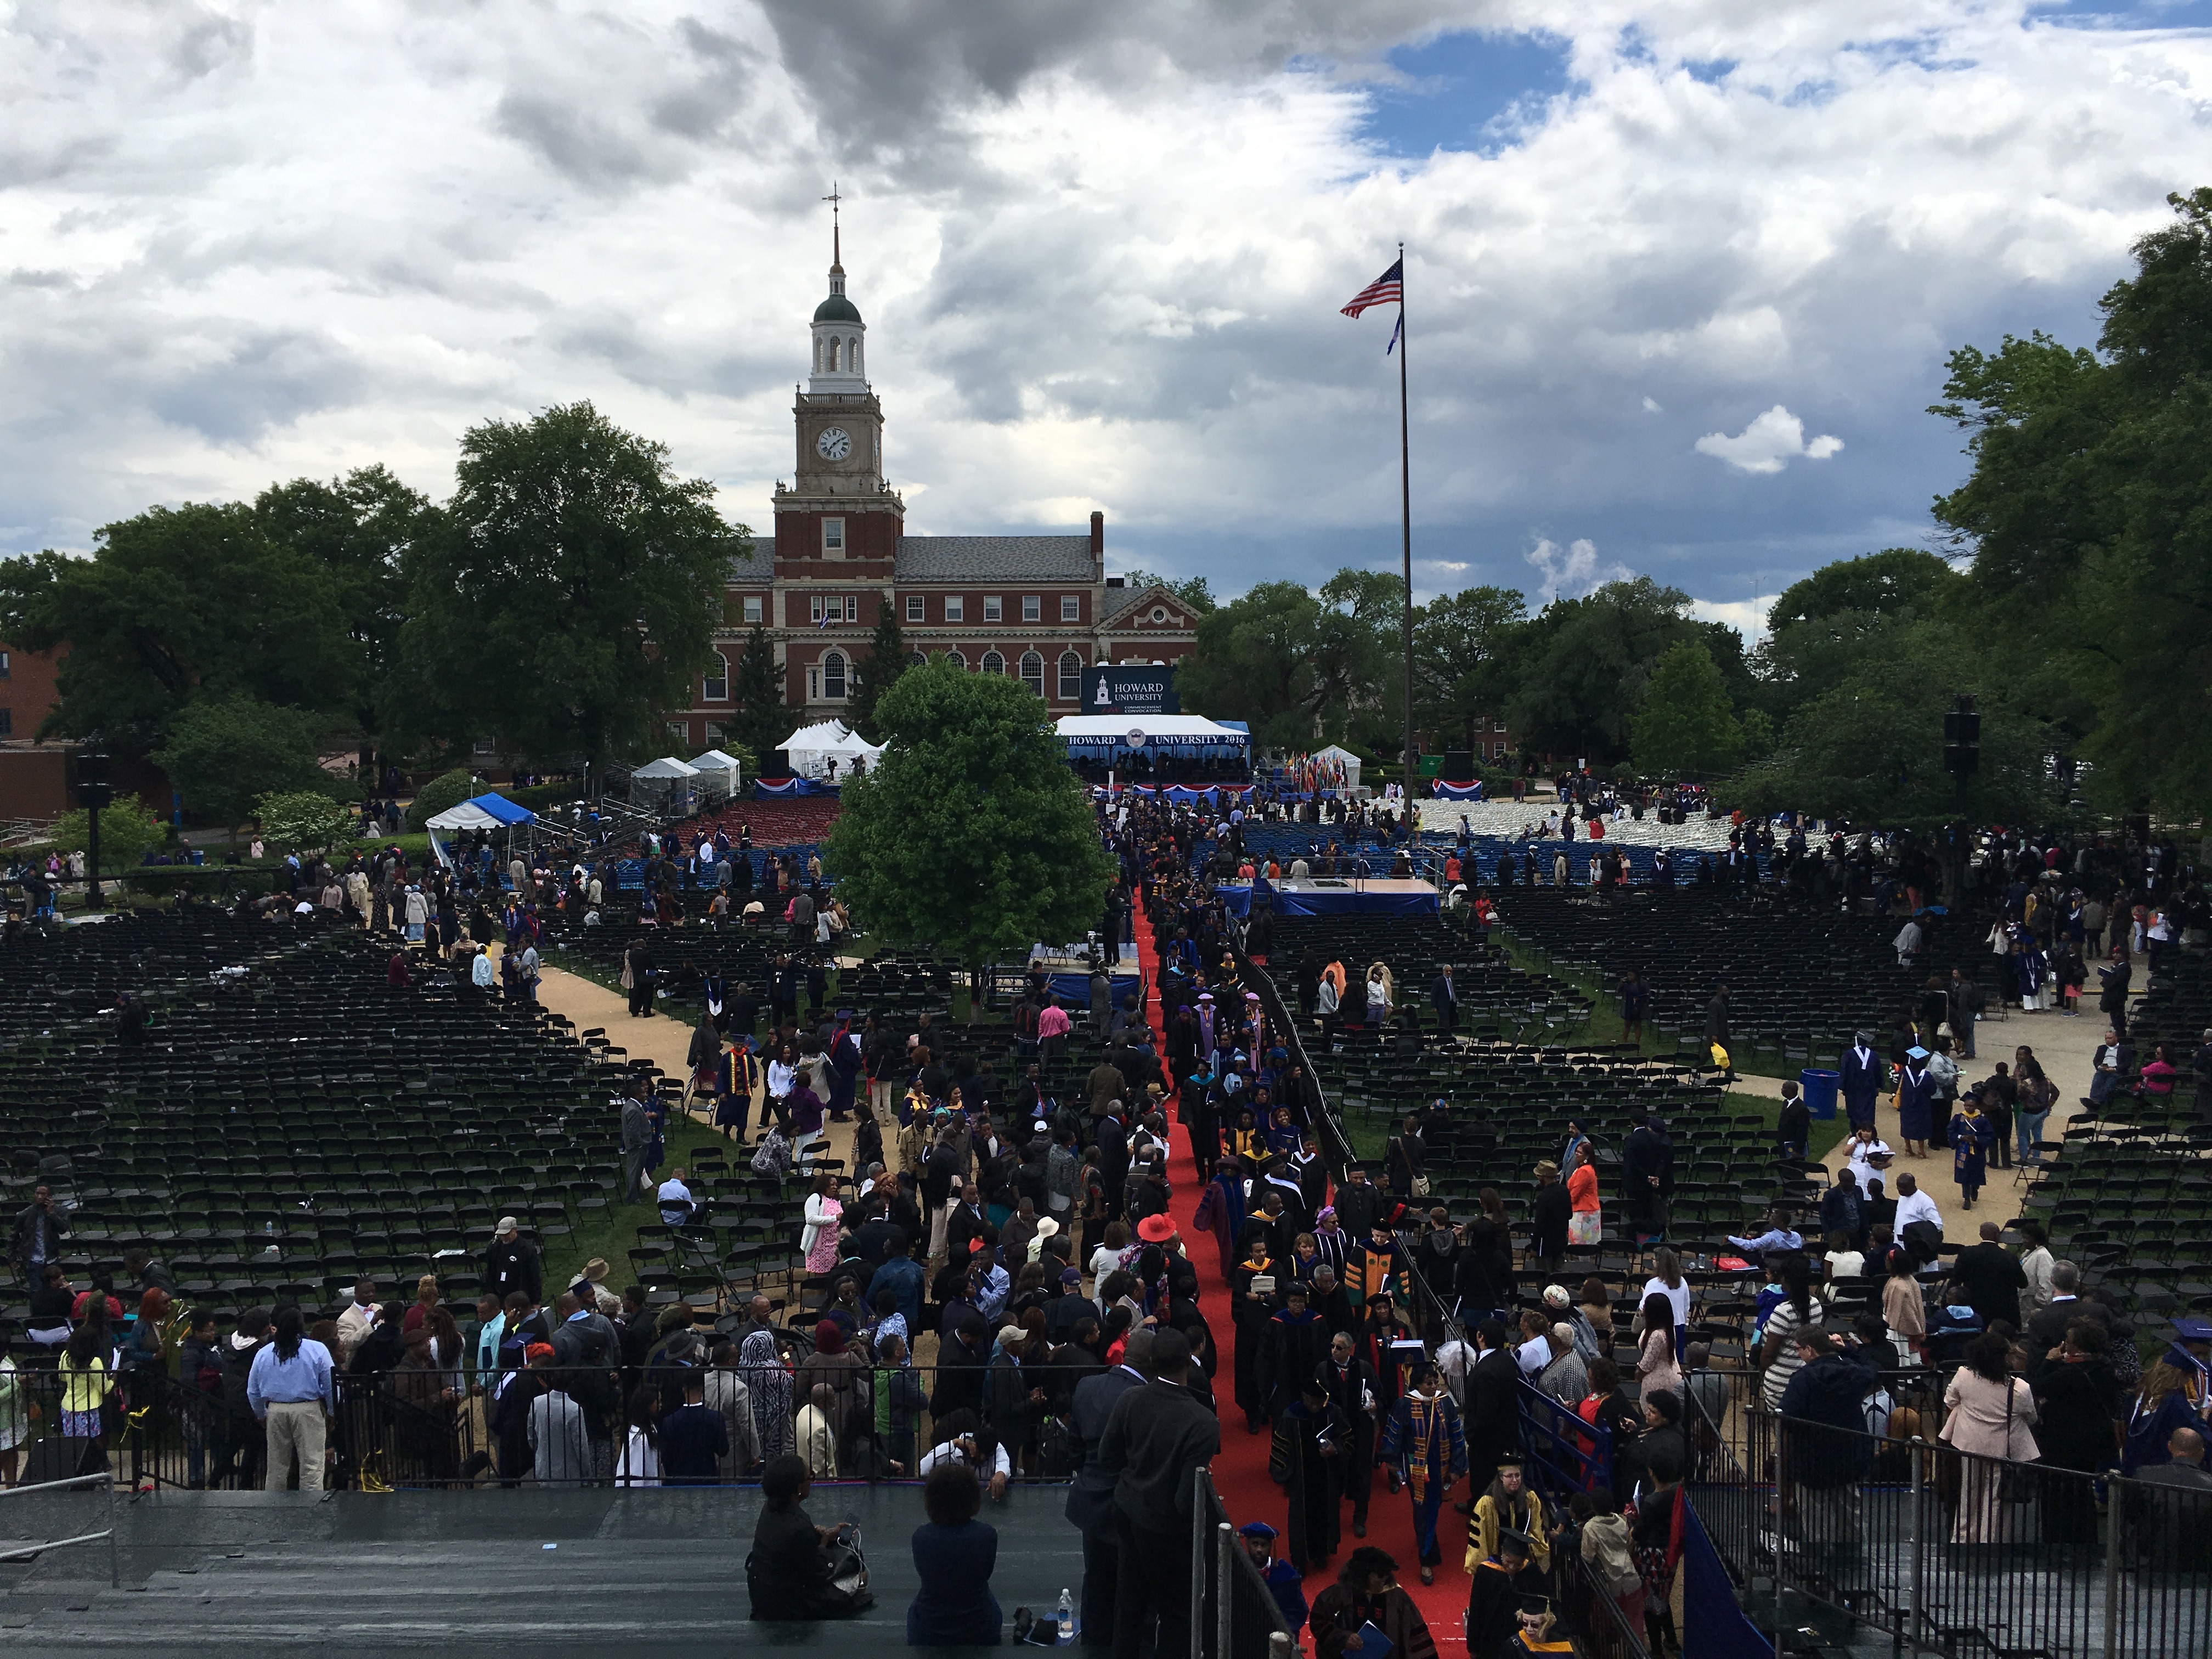 The Howard University Commencement Convocation